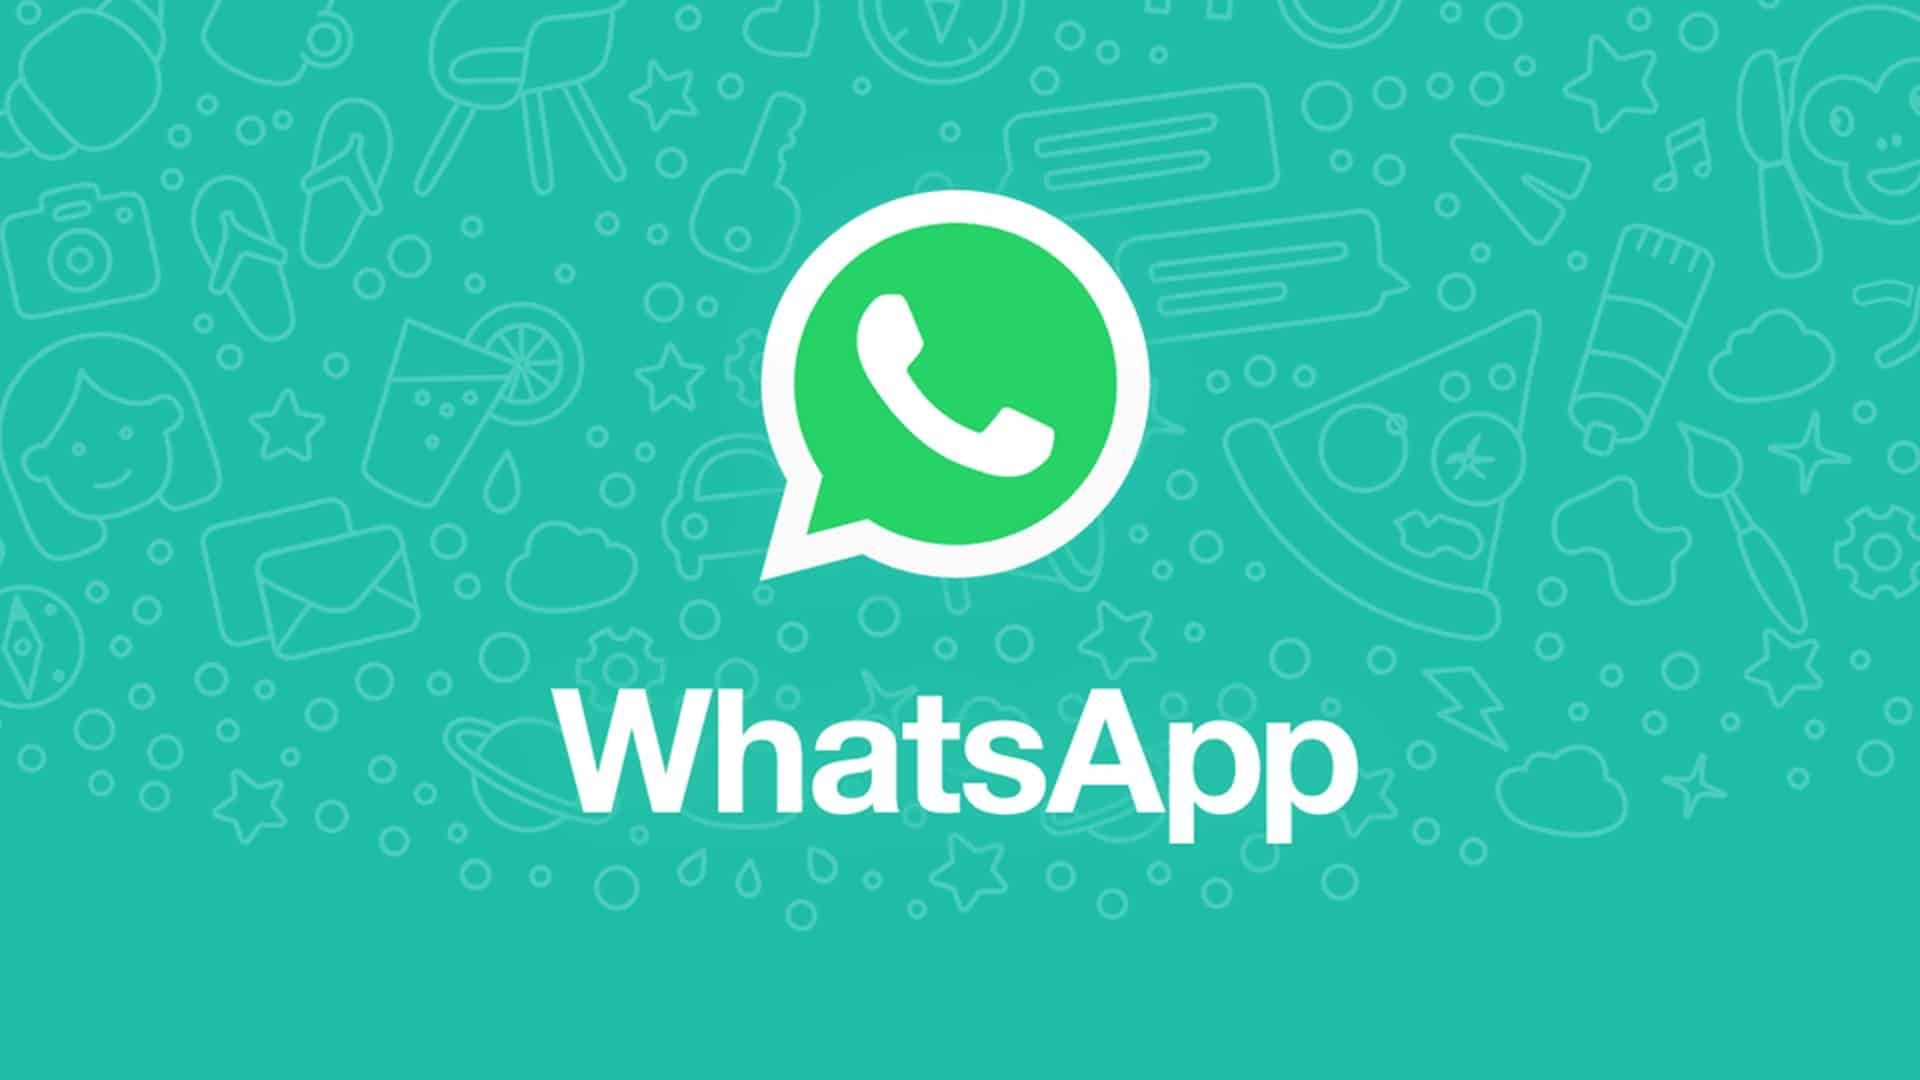 WhatsApp banned over 2 mn Indian accounts in Aug: Compliance report